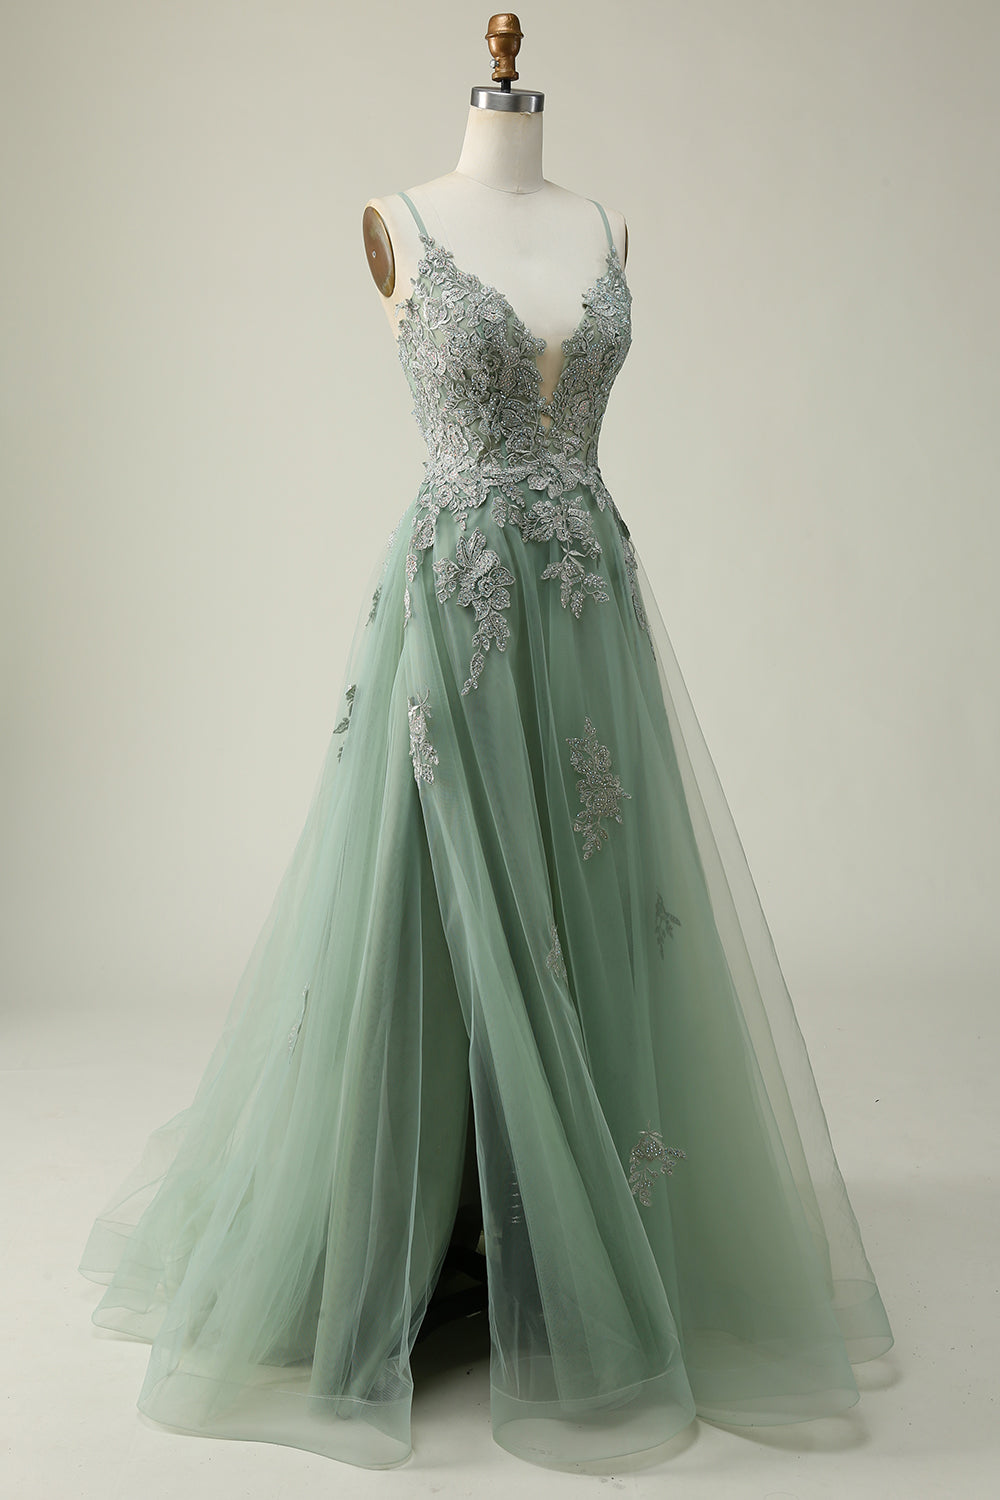 Prom Dresses Stores, A Line Spaghetti Straps Green Long Prom Dress with Criss Cross Back